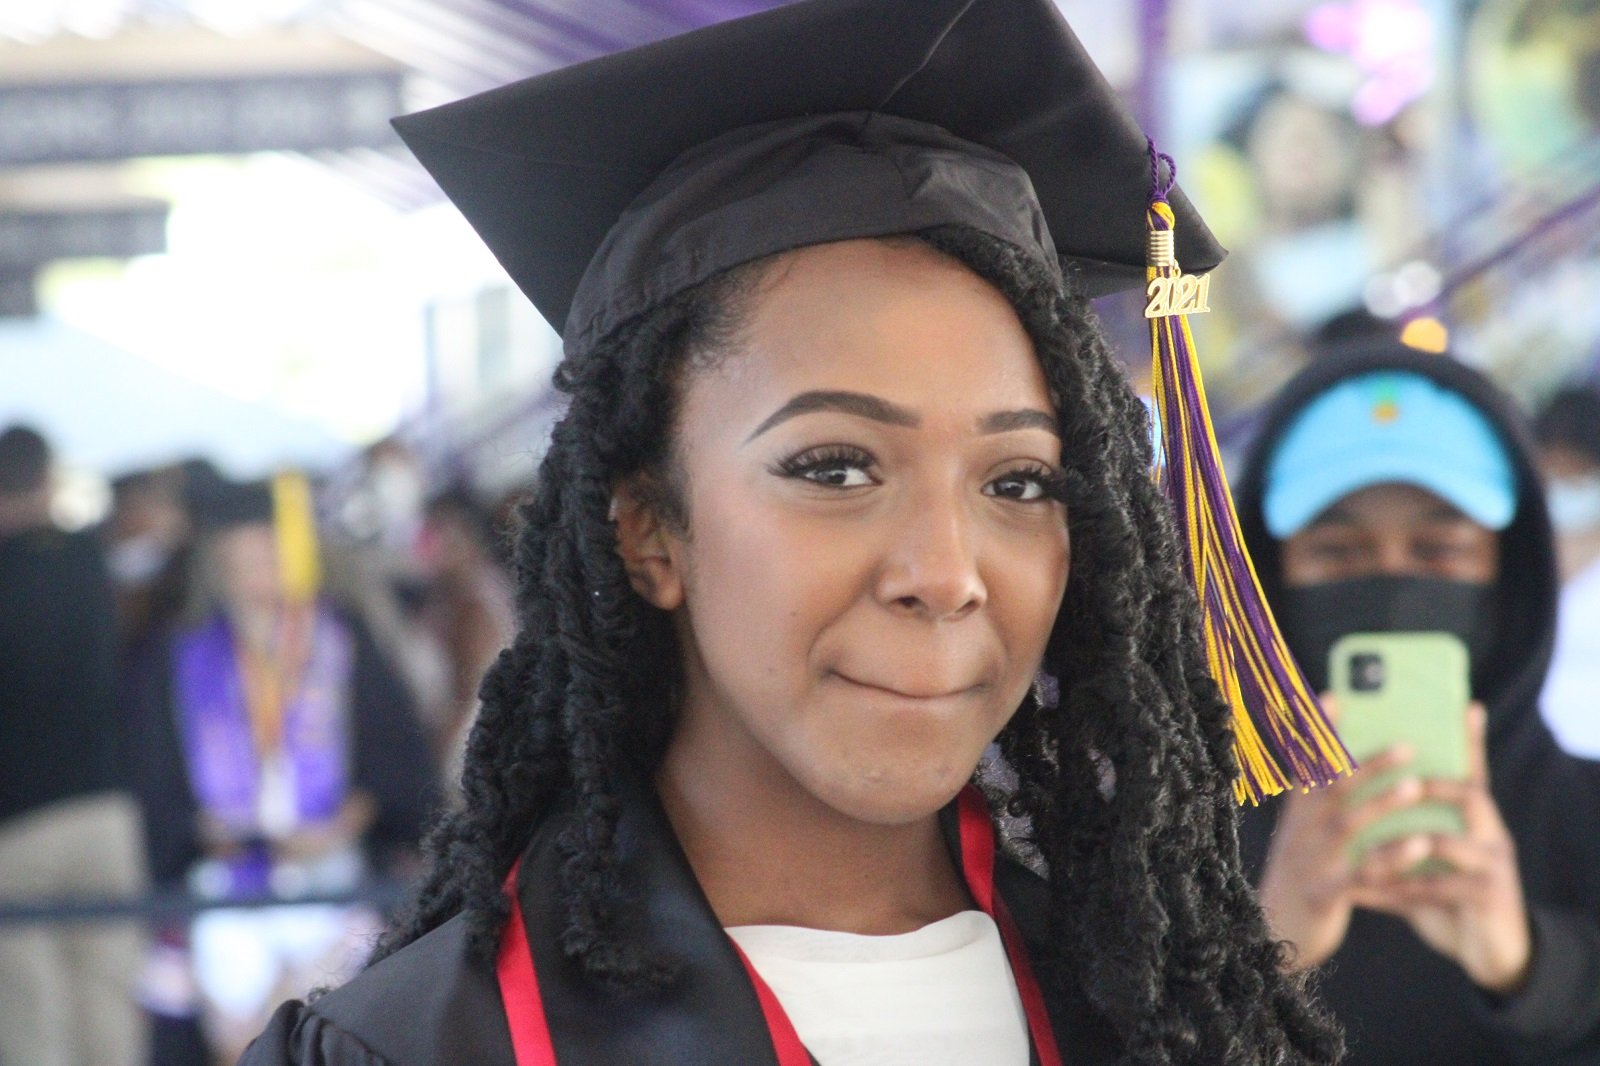 UAlbany Celebrates Unique Commencement with Classes of 2020 & 2021